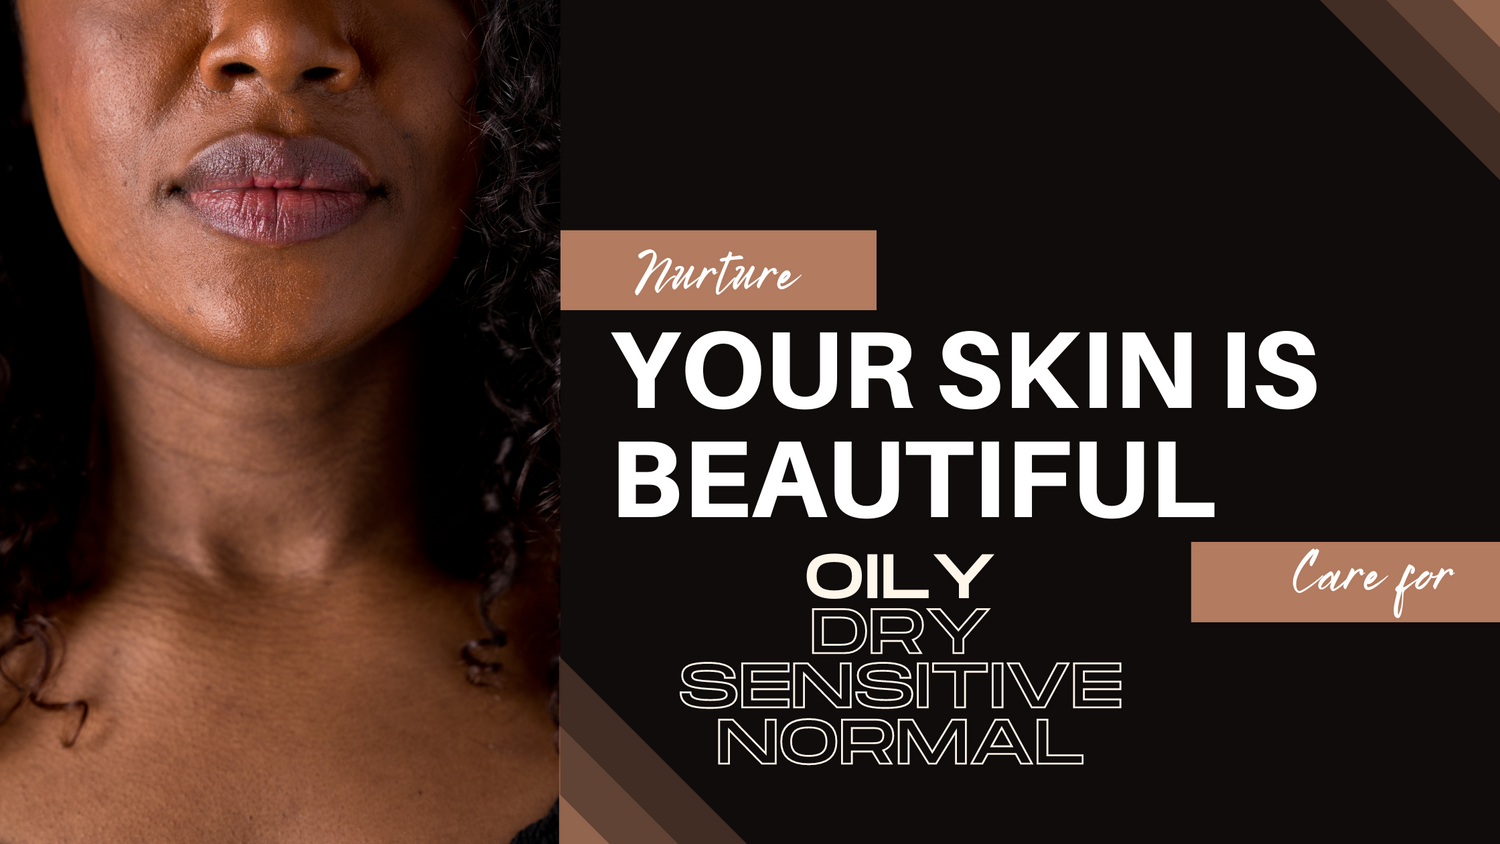 High-end, vegan-based cosmetics geared for women of color. Cosmetics created for women of color, ages 35 to 55, specializing in moisturizing all skin types while also aiding in creating a healthy skin care regiment. 